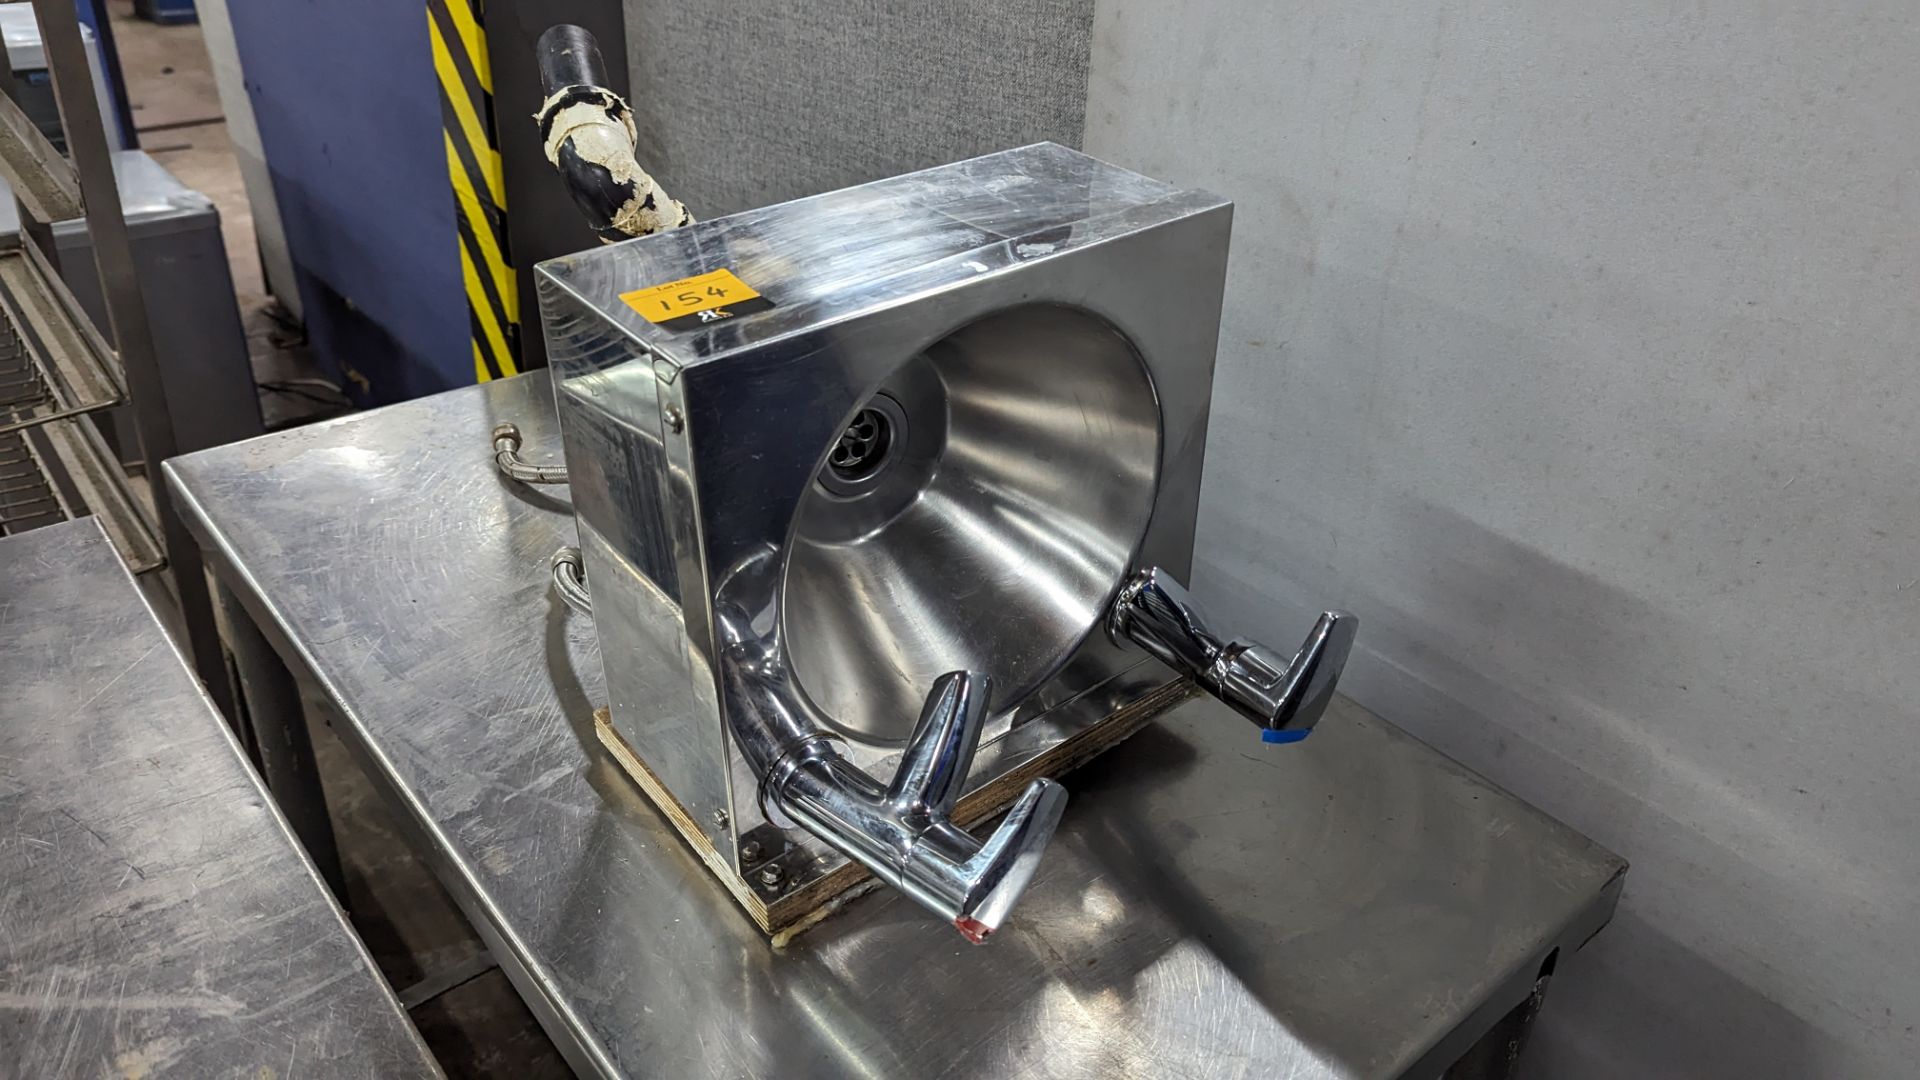 Stainless steel wall mountable handwashing basin with twin taps - Image 3 of 3